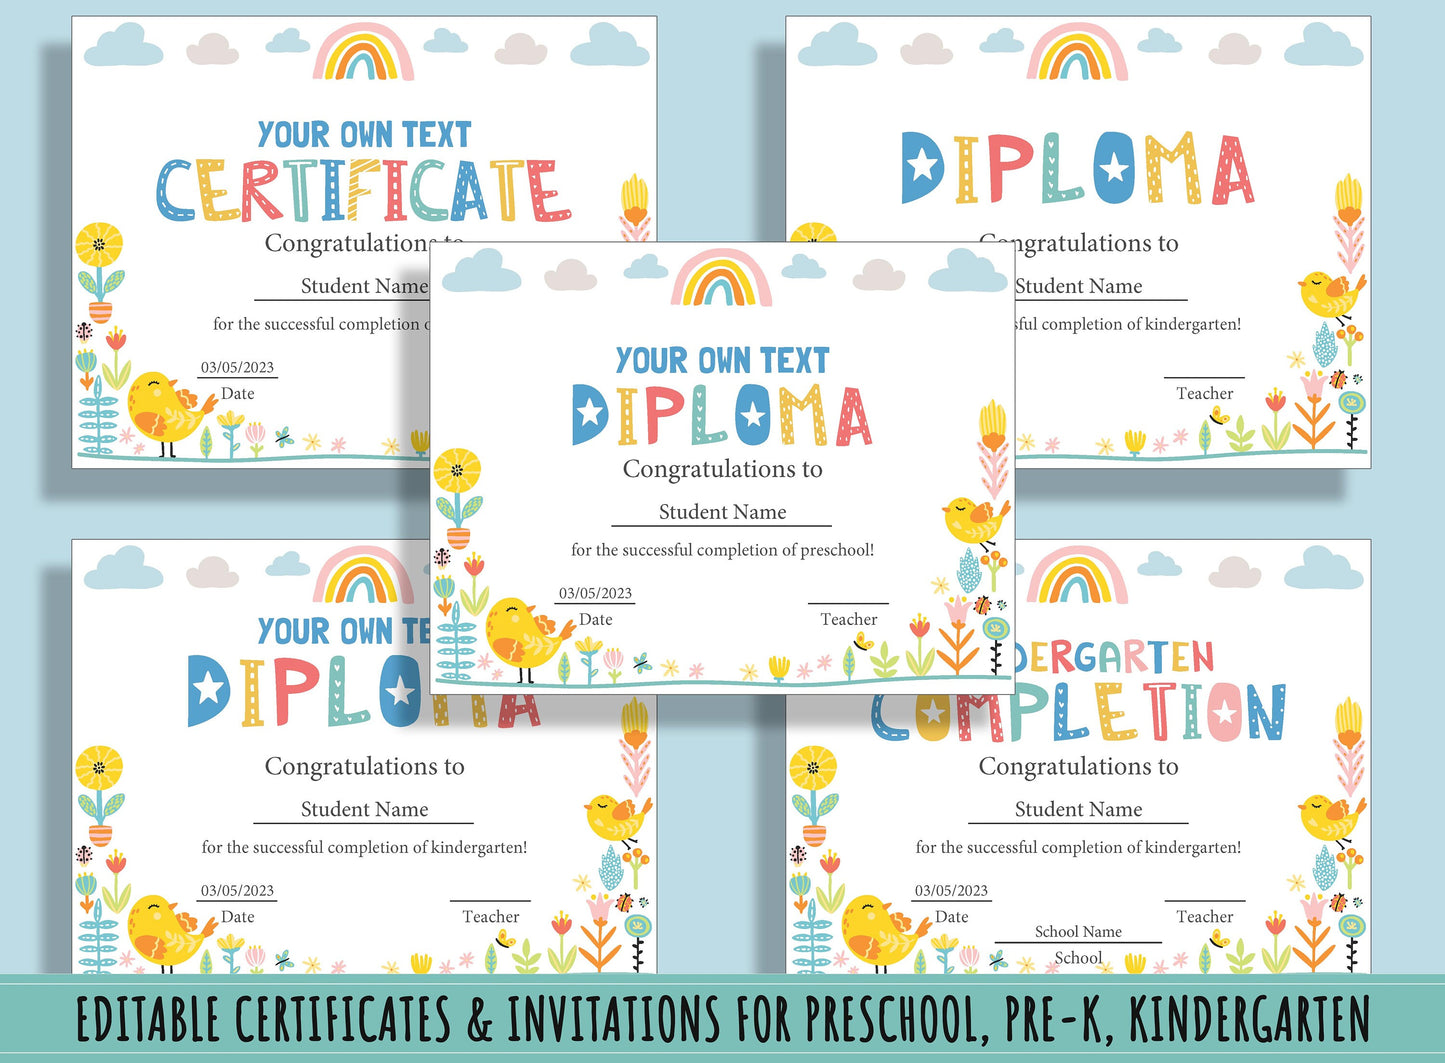 Diplomas, Certificates and Graduation Invitations for Preschool, Pre-K, Kindergarten: A Comprehensive Collection, 37 Pages, Instant Download